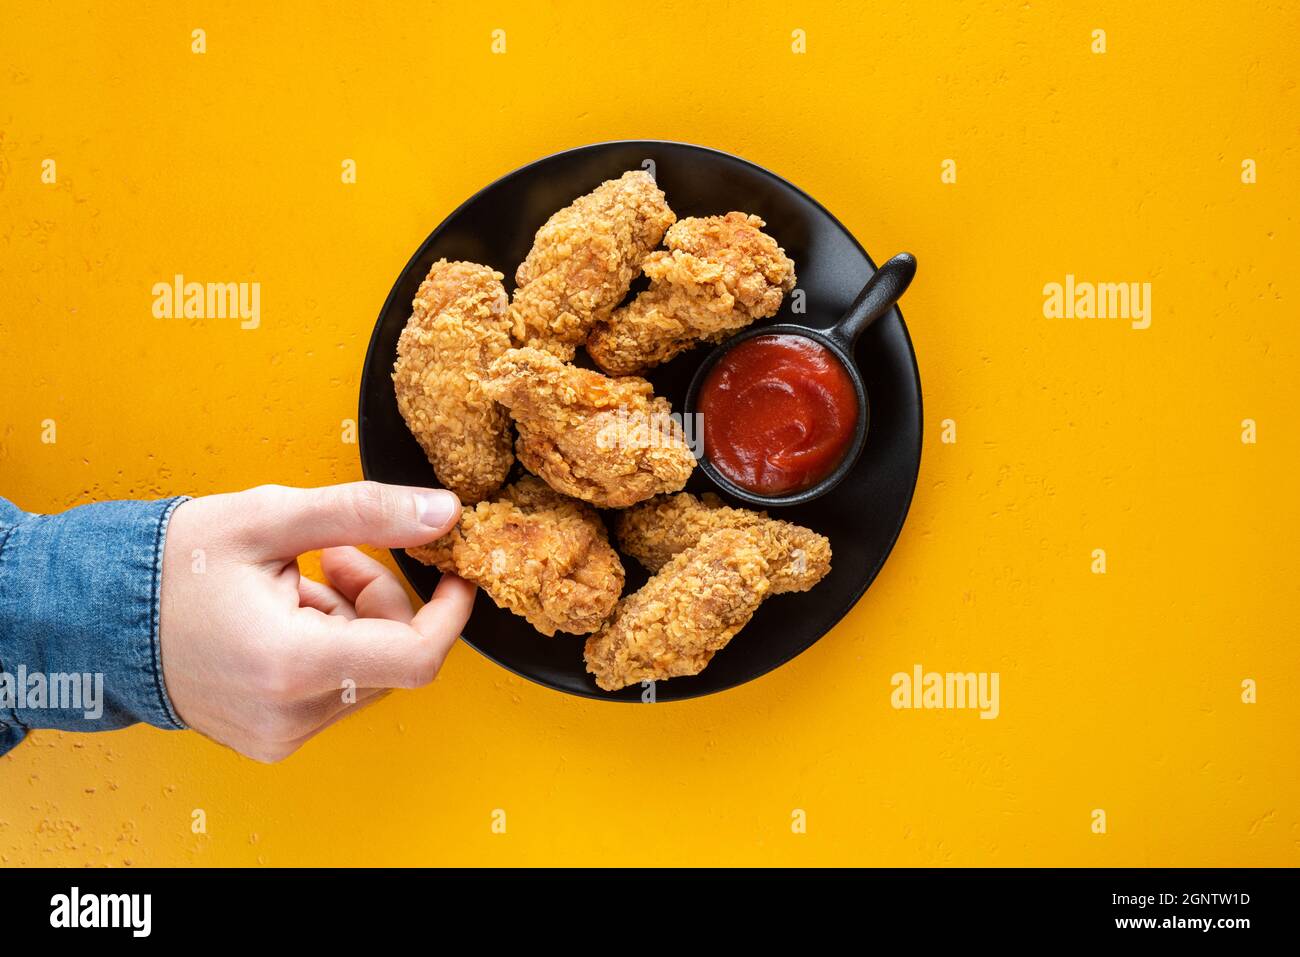 Crispy fried chicken wings with tomato sauce on plate, yellow background. Male hand picking chicken wing, junk food, unhealthy eating concept. Top vie Stock Photo